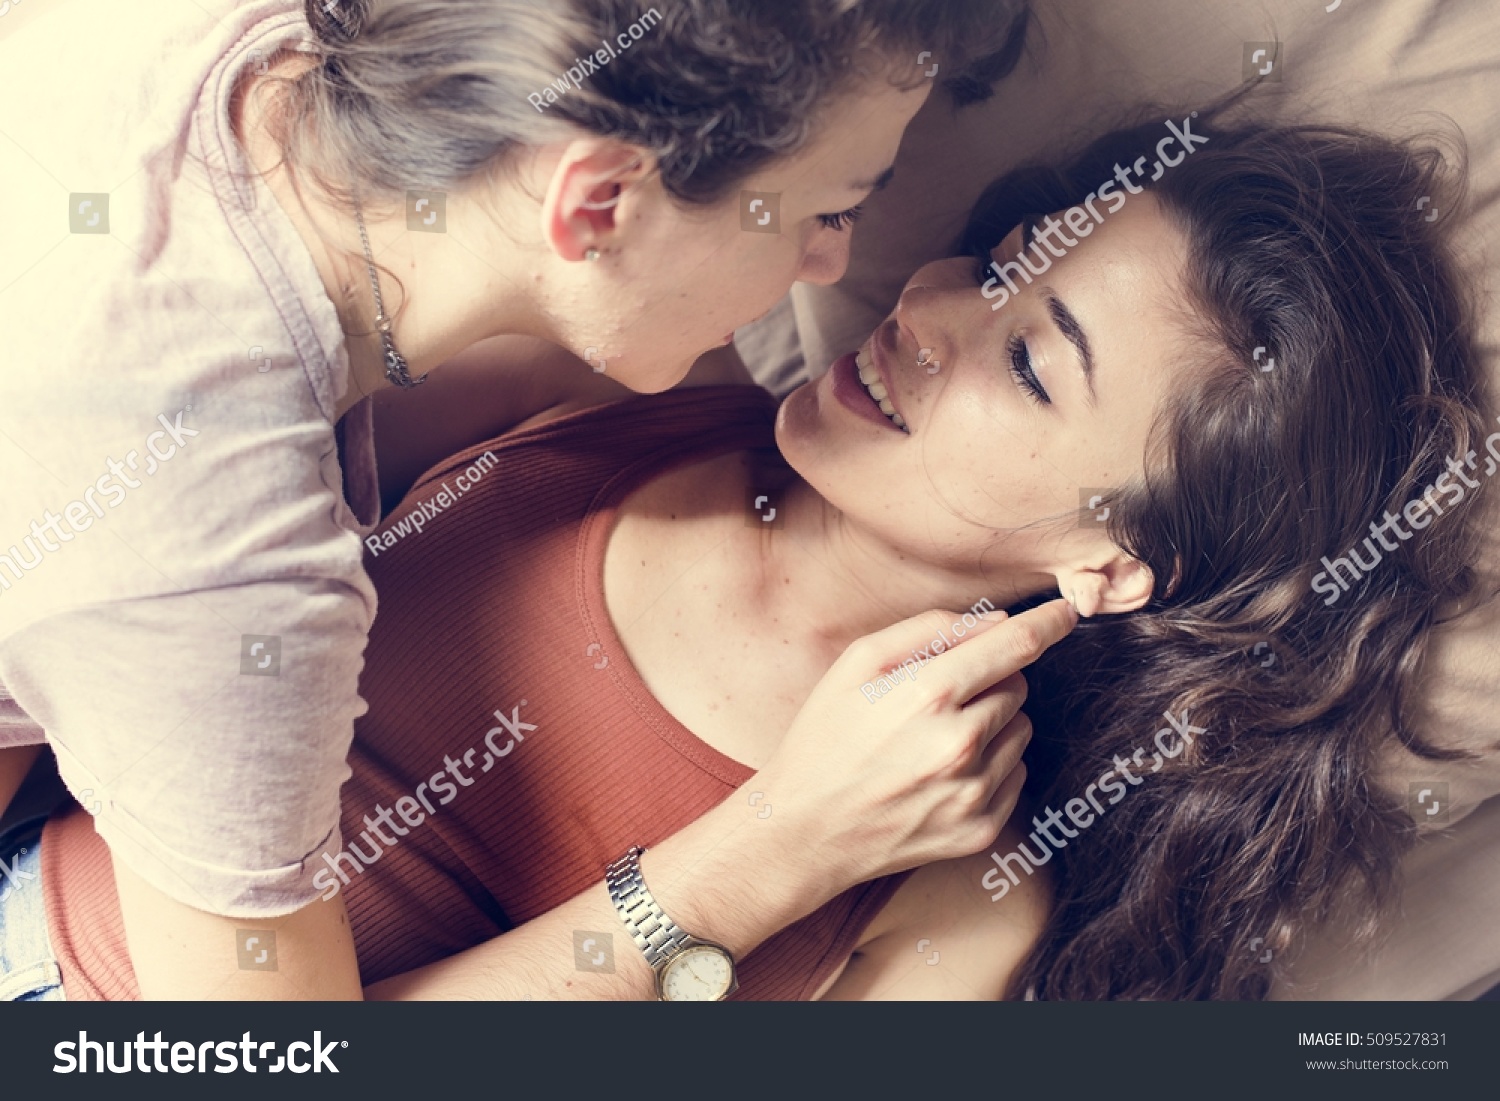 Lesbian Pictures